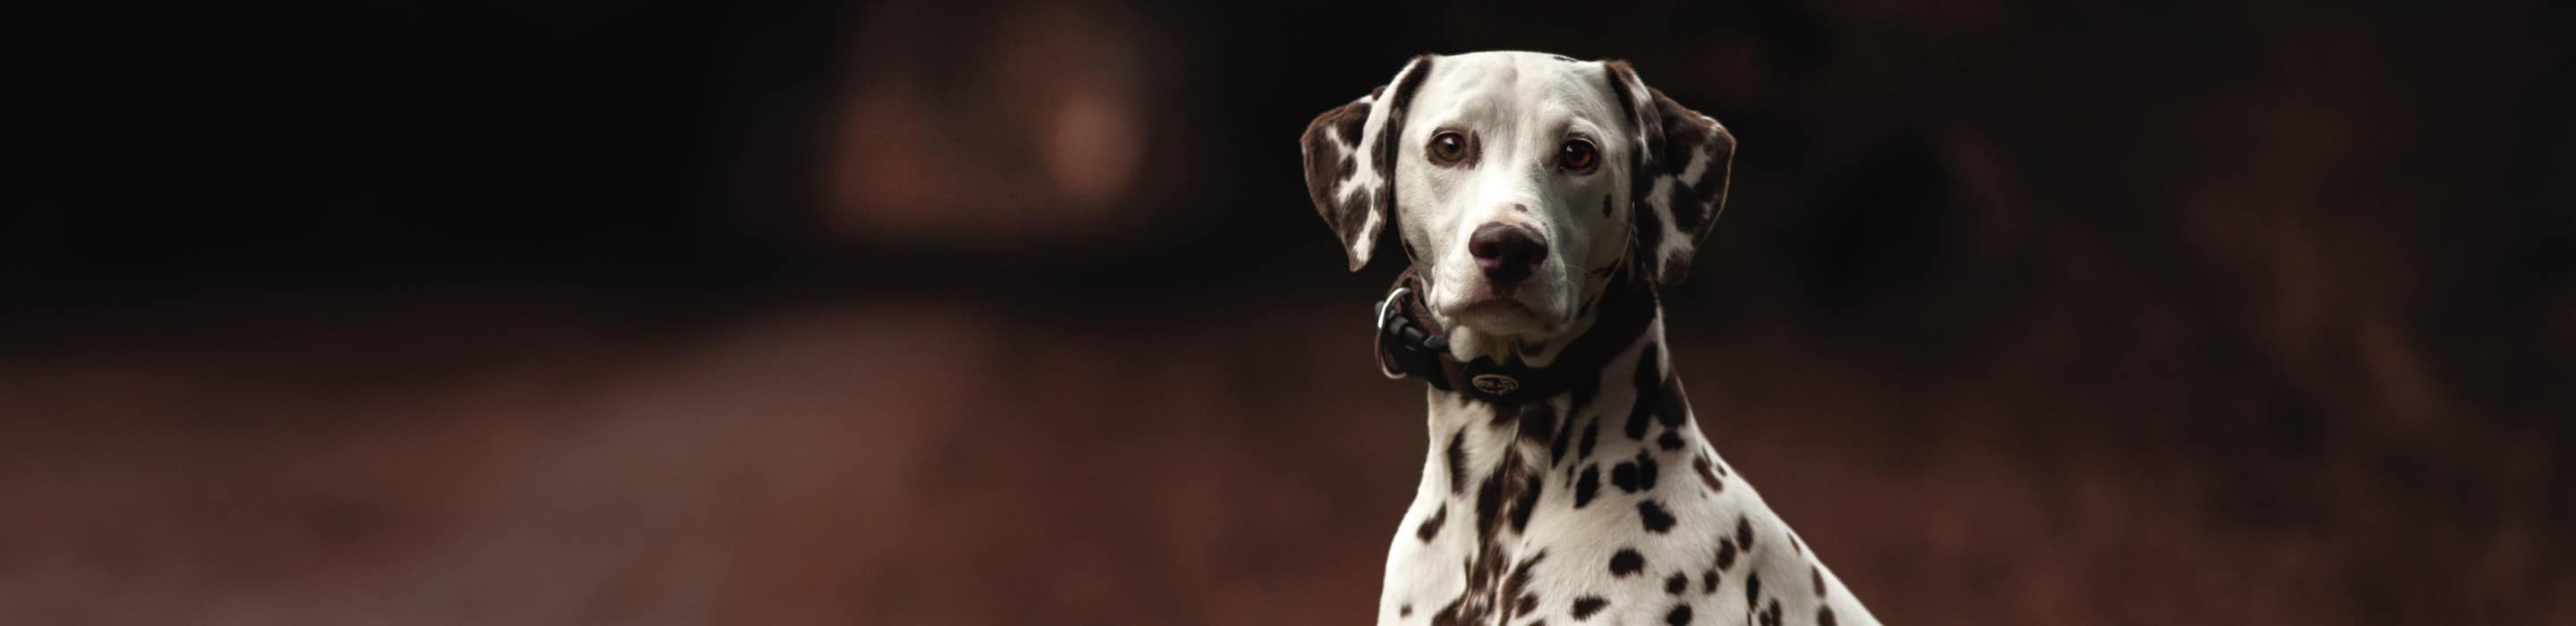 A Dalmatian standing with a black collar on looking at the camera.